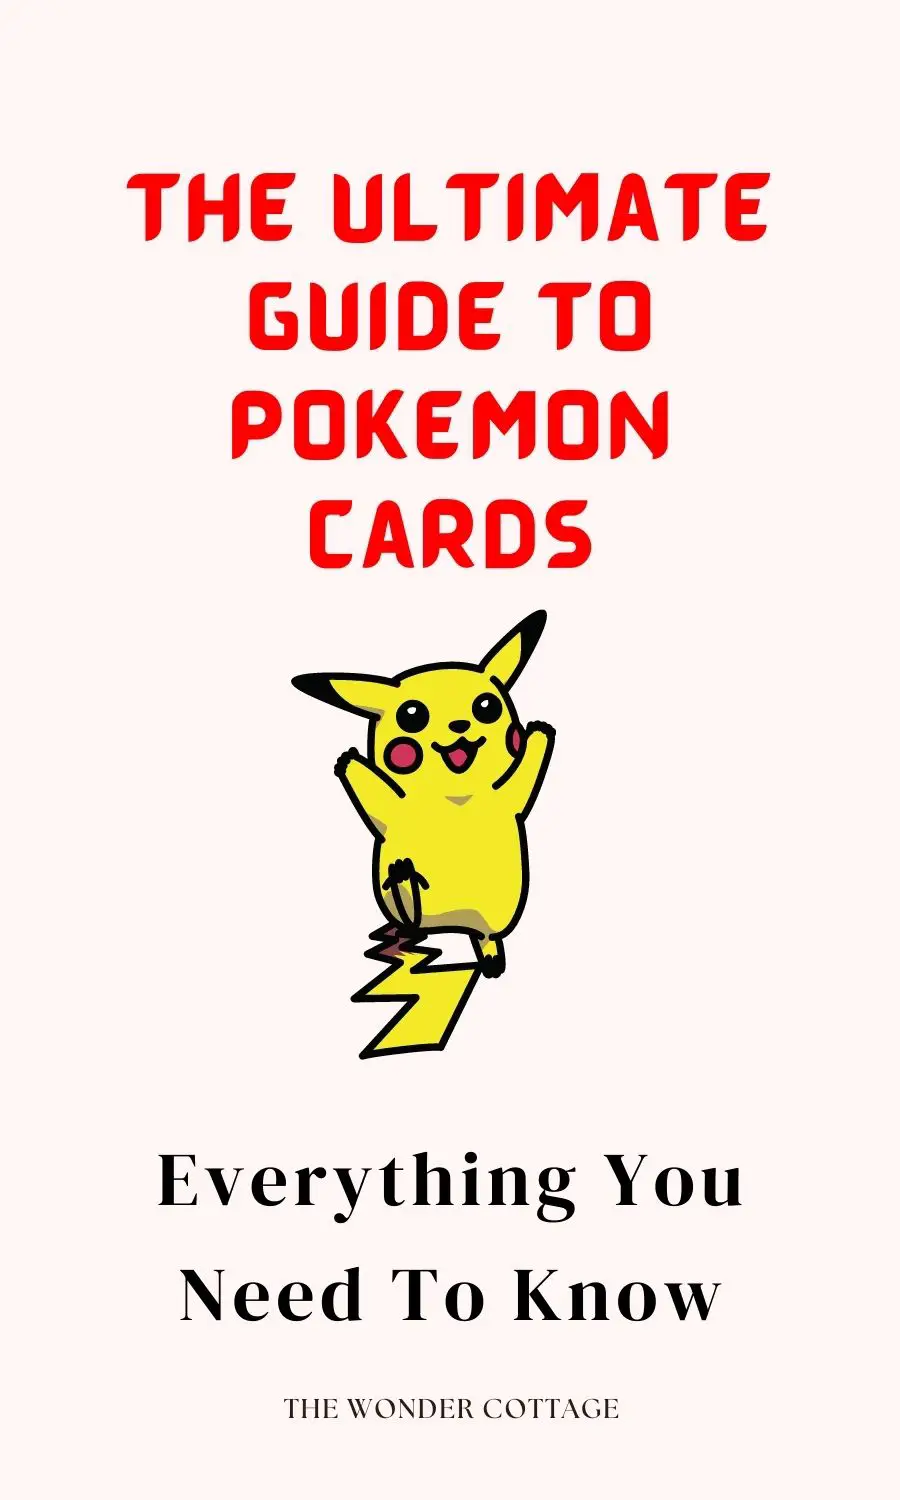 The Ultimate Guide To Pokémon Cards: Everything You Need To Know